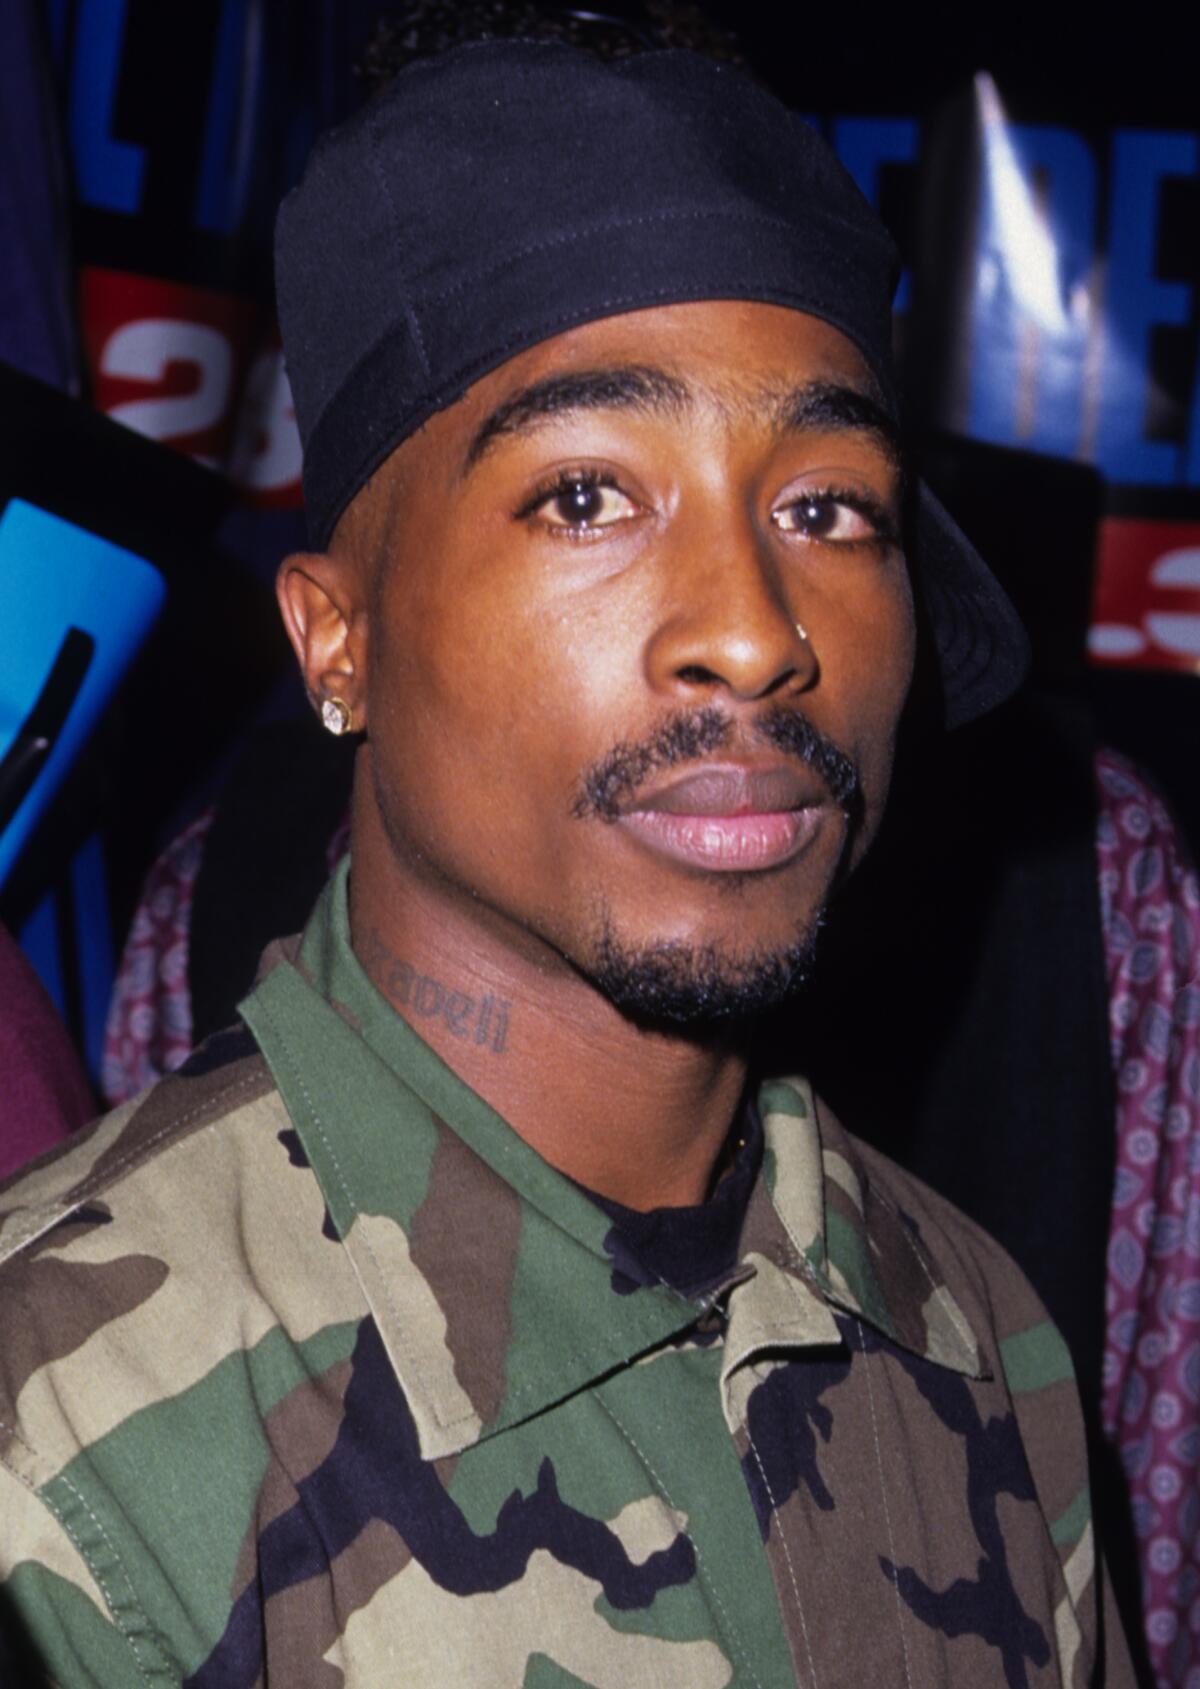 Tupac Shakur in a head-and-shoulders vertical frame, looking at the camera in a relaxed yet direct way